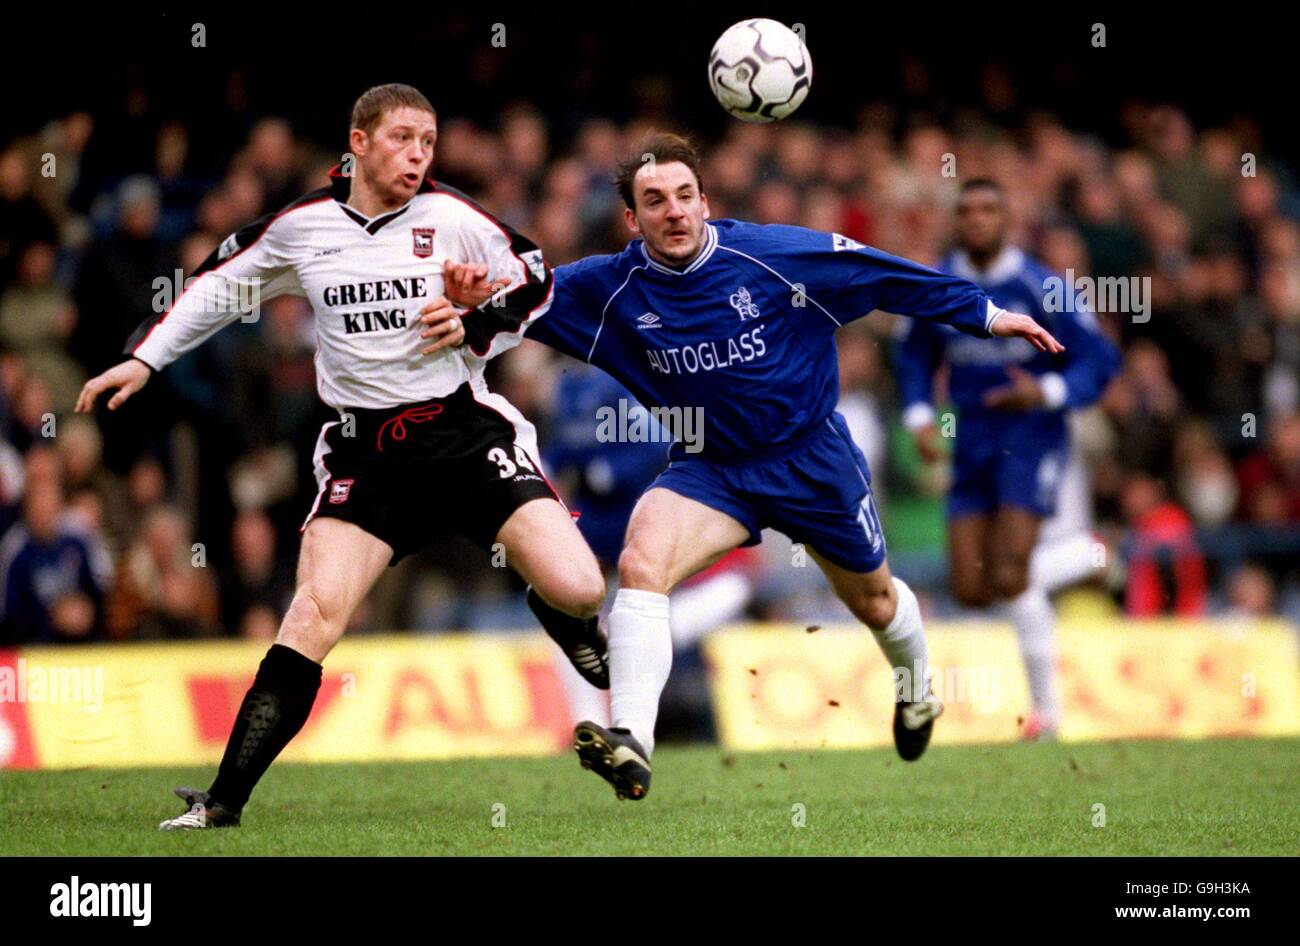 Ipswich Town's Alun Armstrong (l) and Chelsea's Albert Ferrer (r) battle for the ball Stock Photo